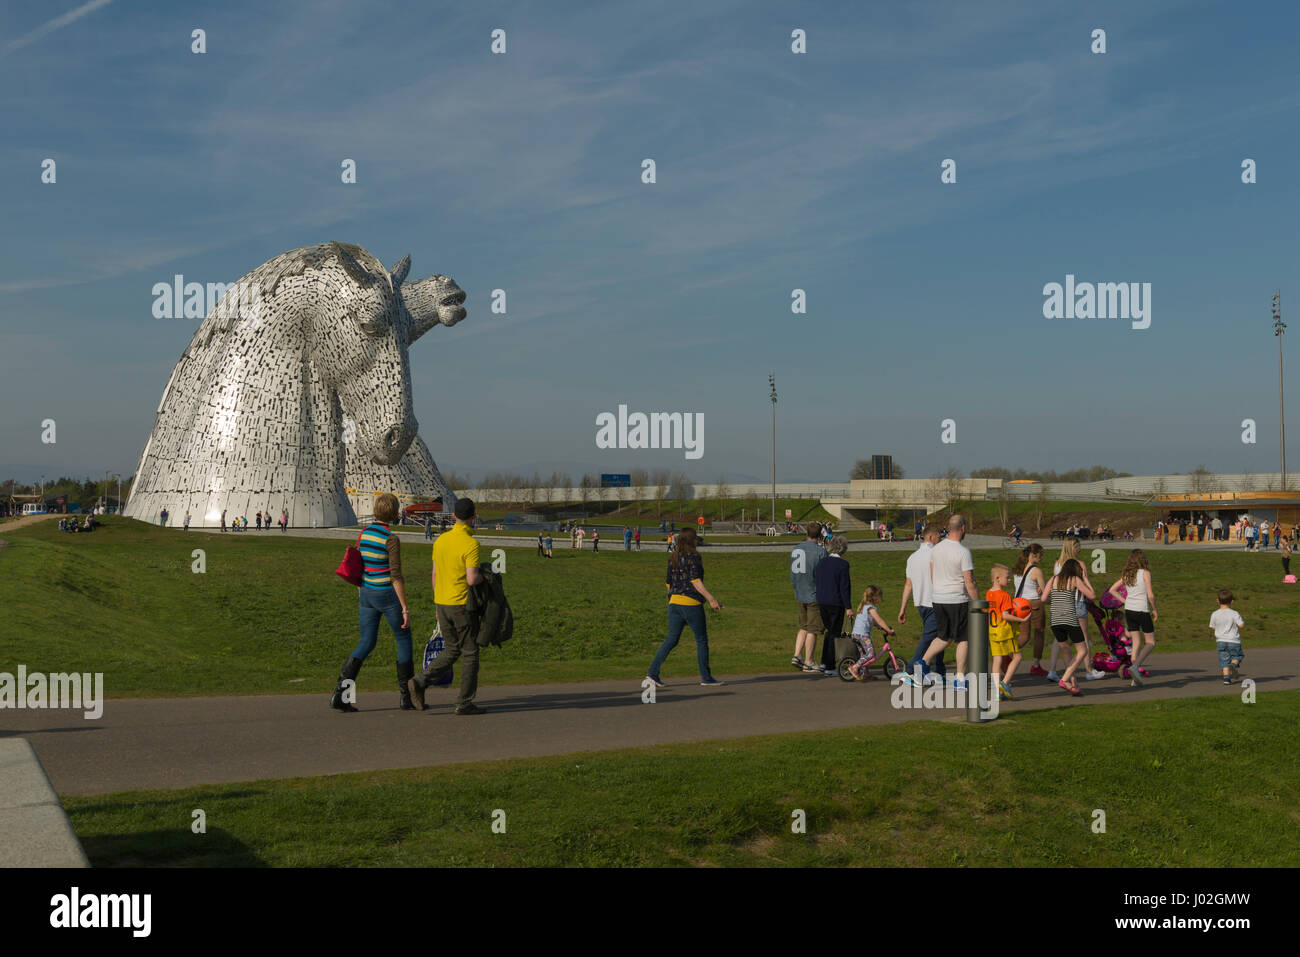 Falkirk, Scotland, United Kingdom. 8th April, Families enjoying spring sunshine flock to the Kelpies visitor attraction as the weekend heatwave hits Scotland. Credit: Alan Paterson/Alamy Live News Stock Photo